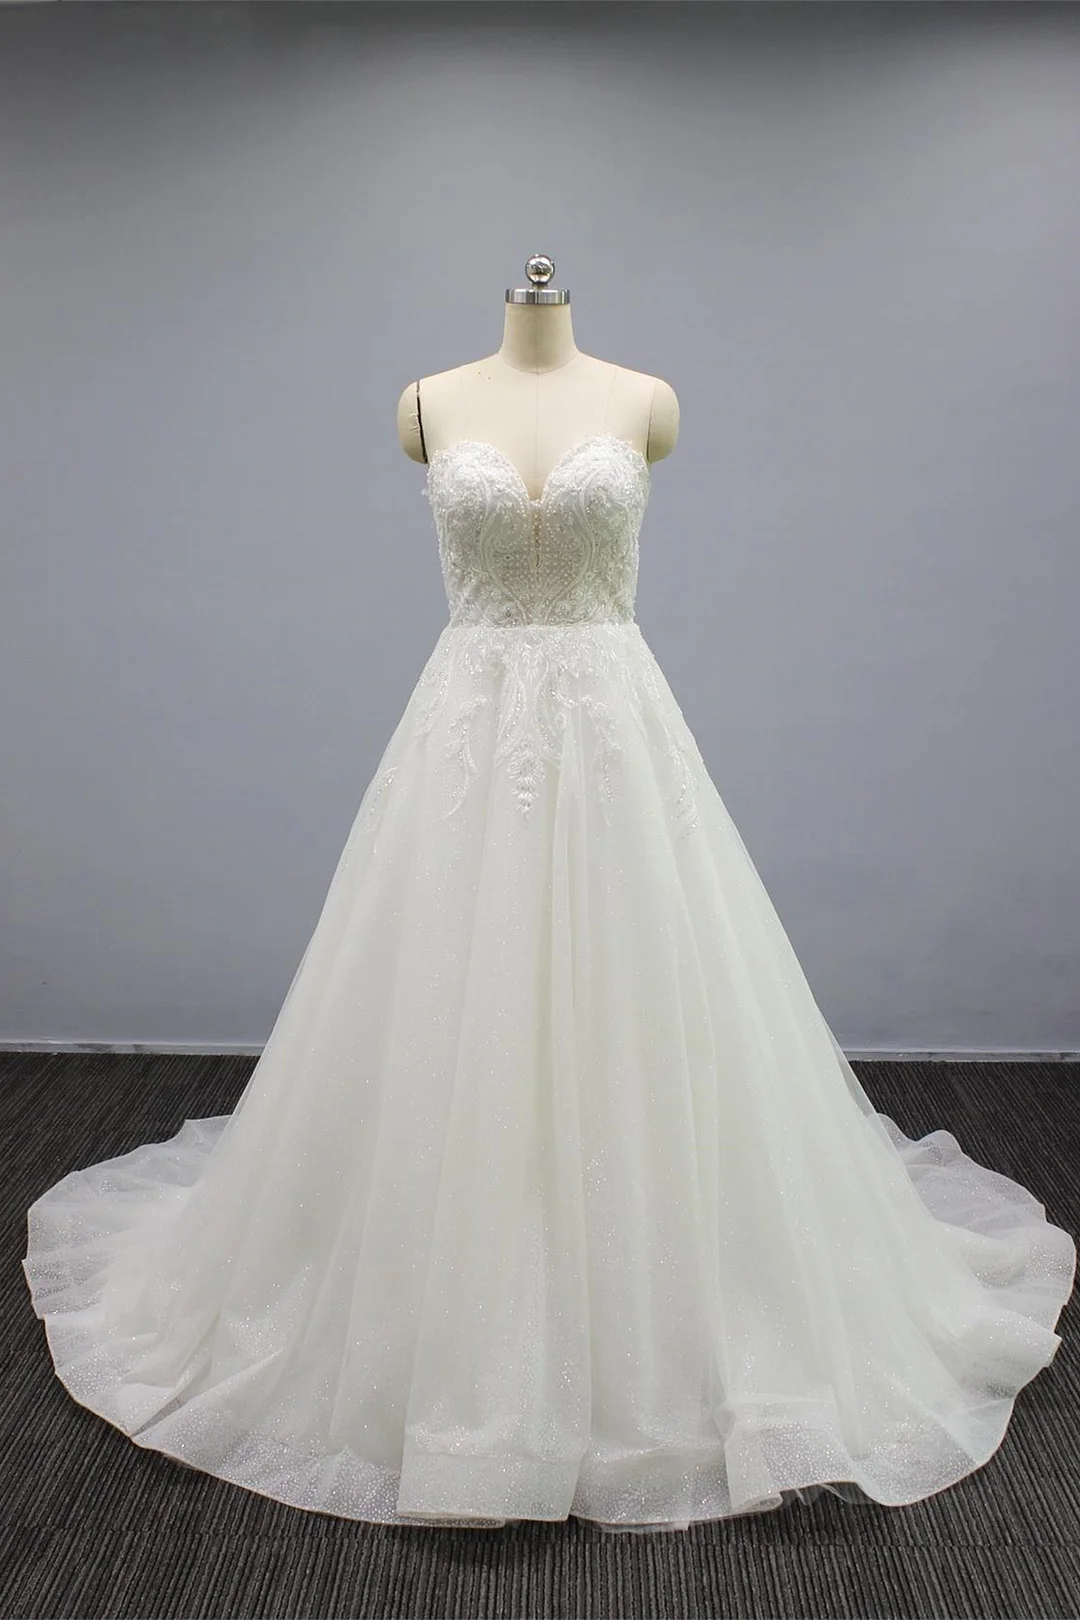 Daisda White Strapless A Line Wedding Dress Tulle With Appliques Beading Glitter Powder